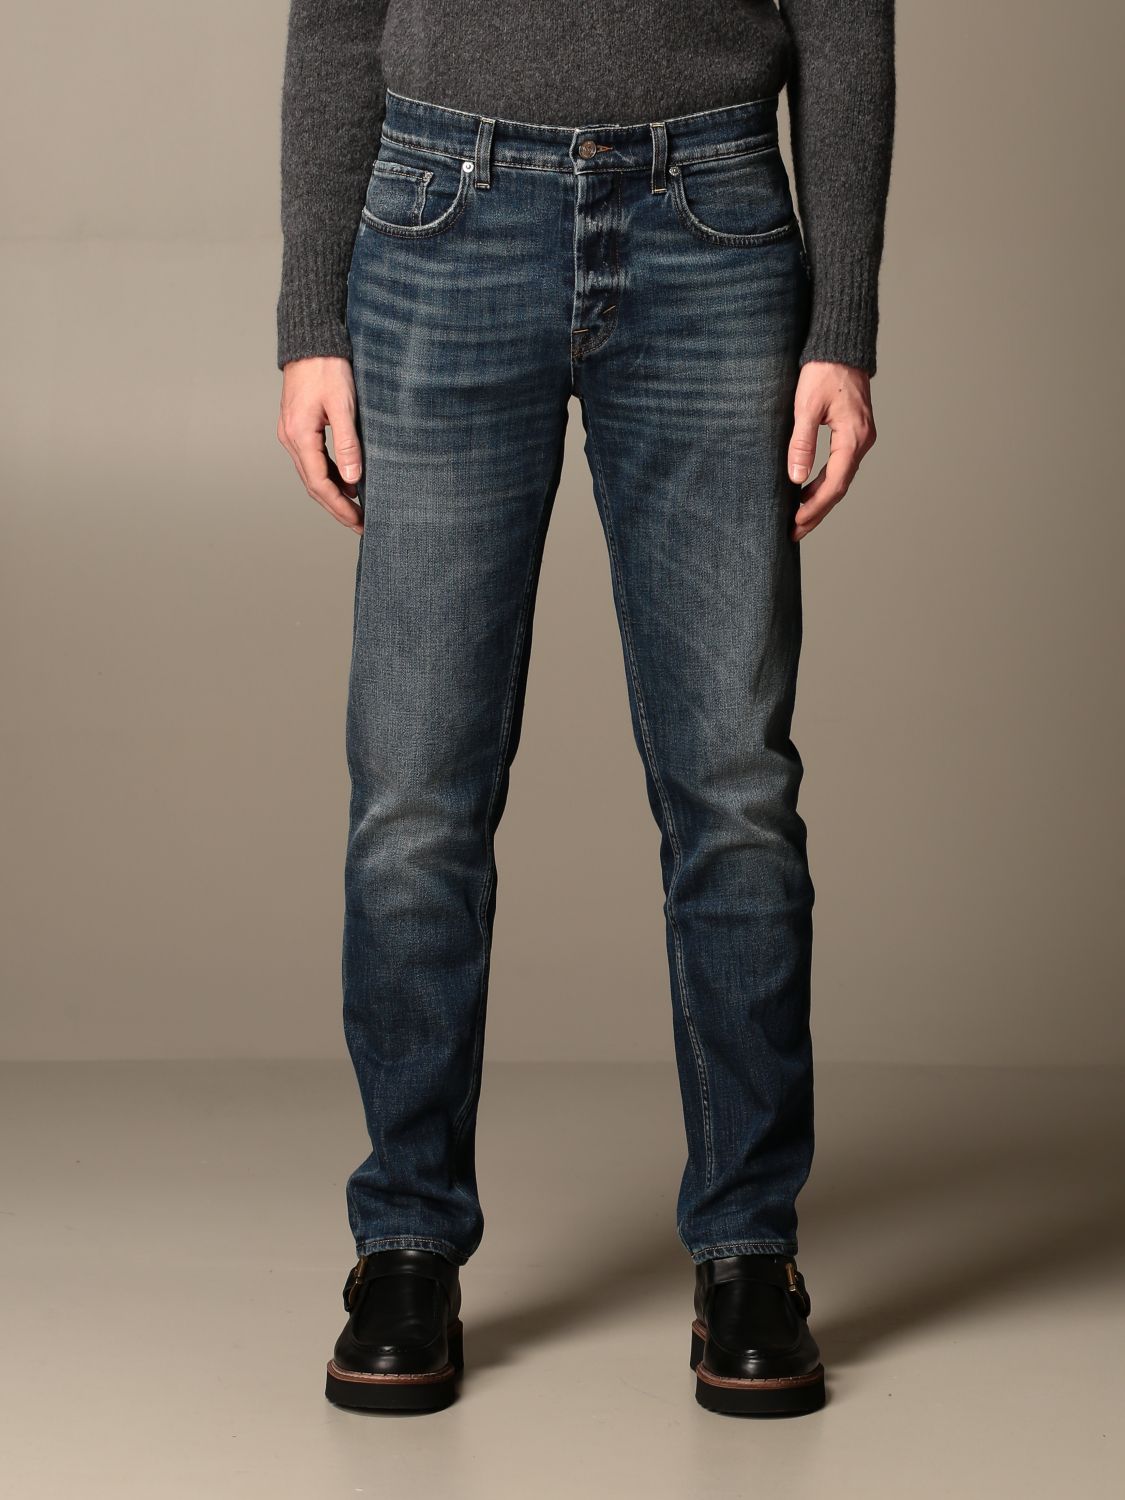 Keith Department Five jeans in regular stretch used denim